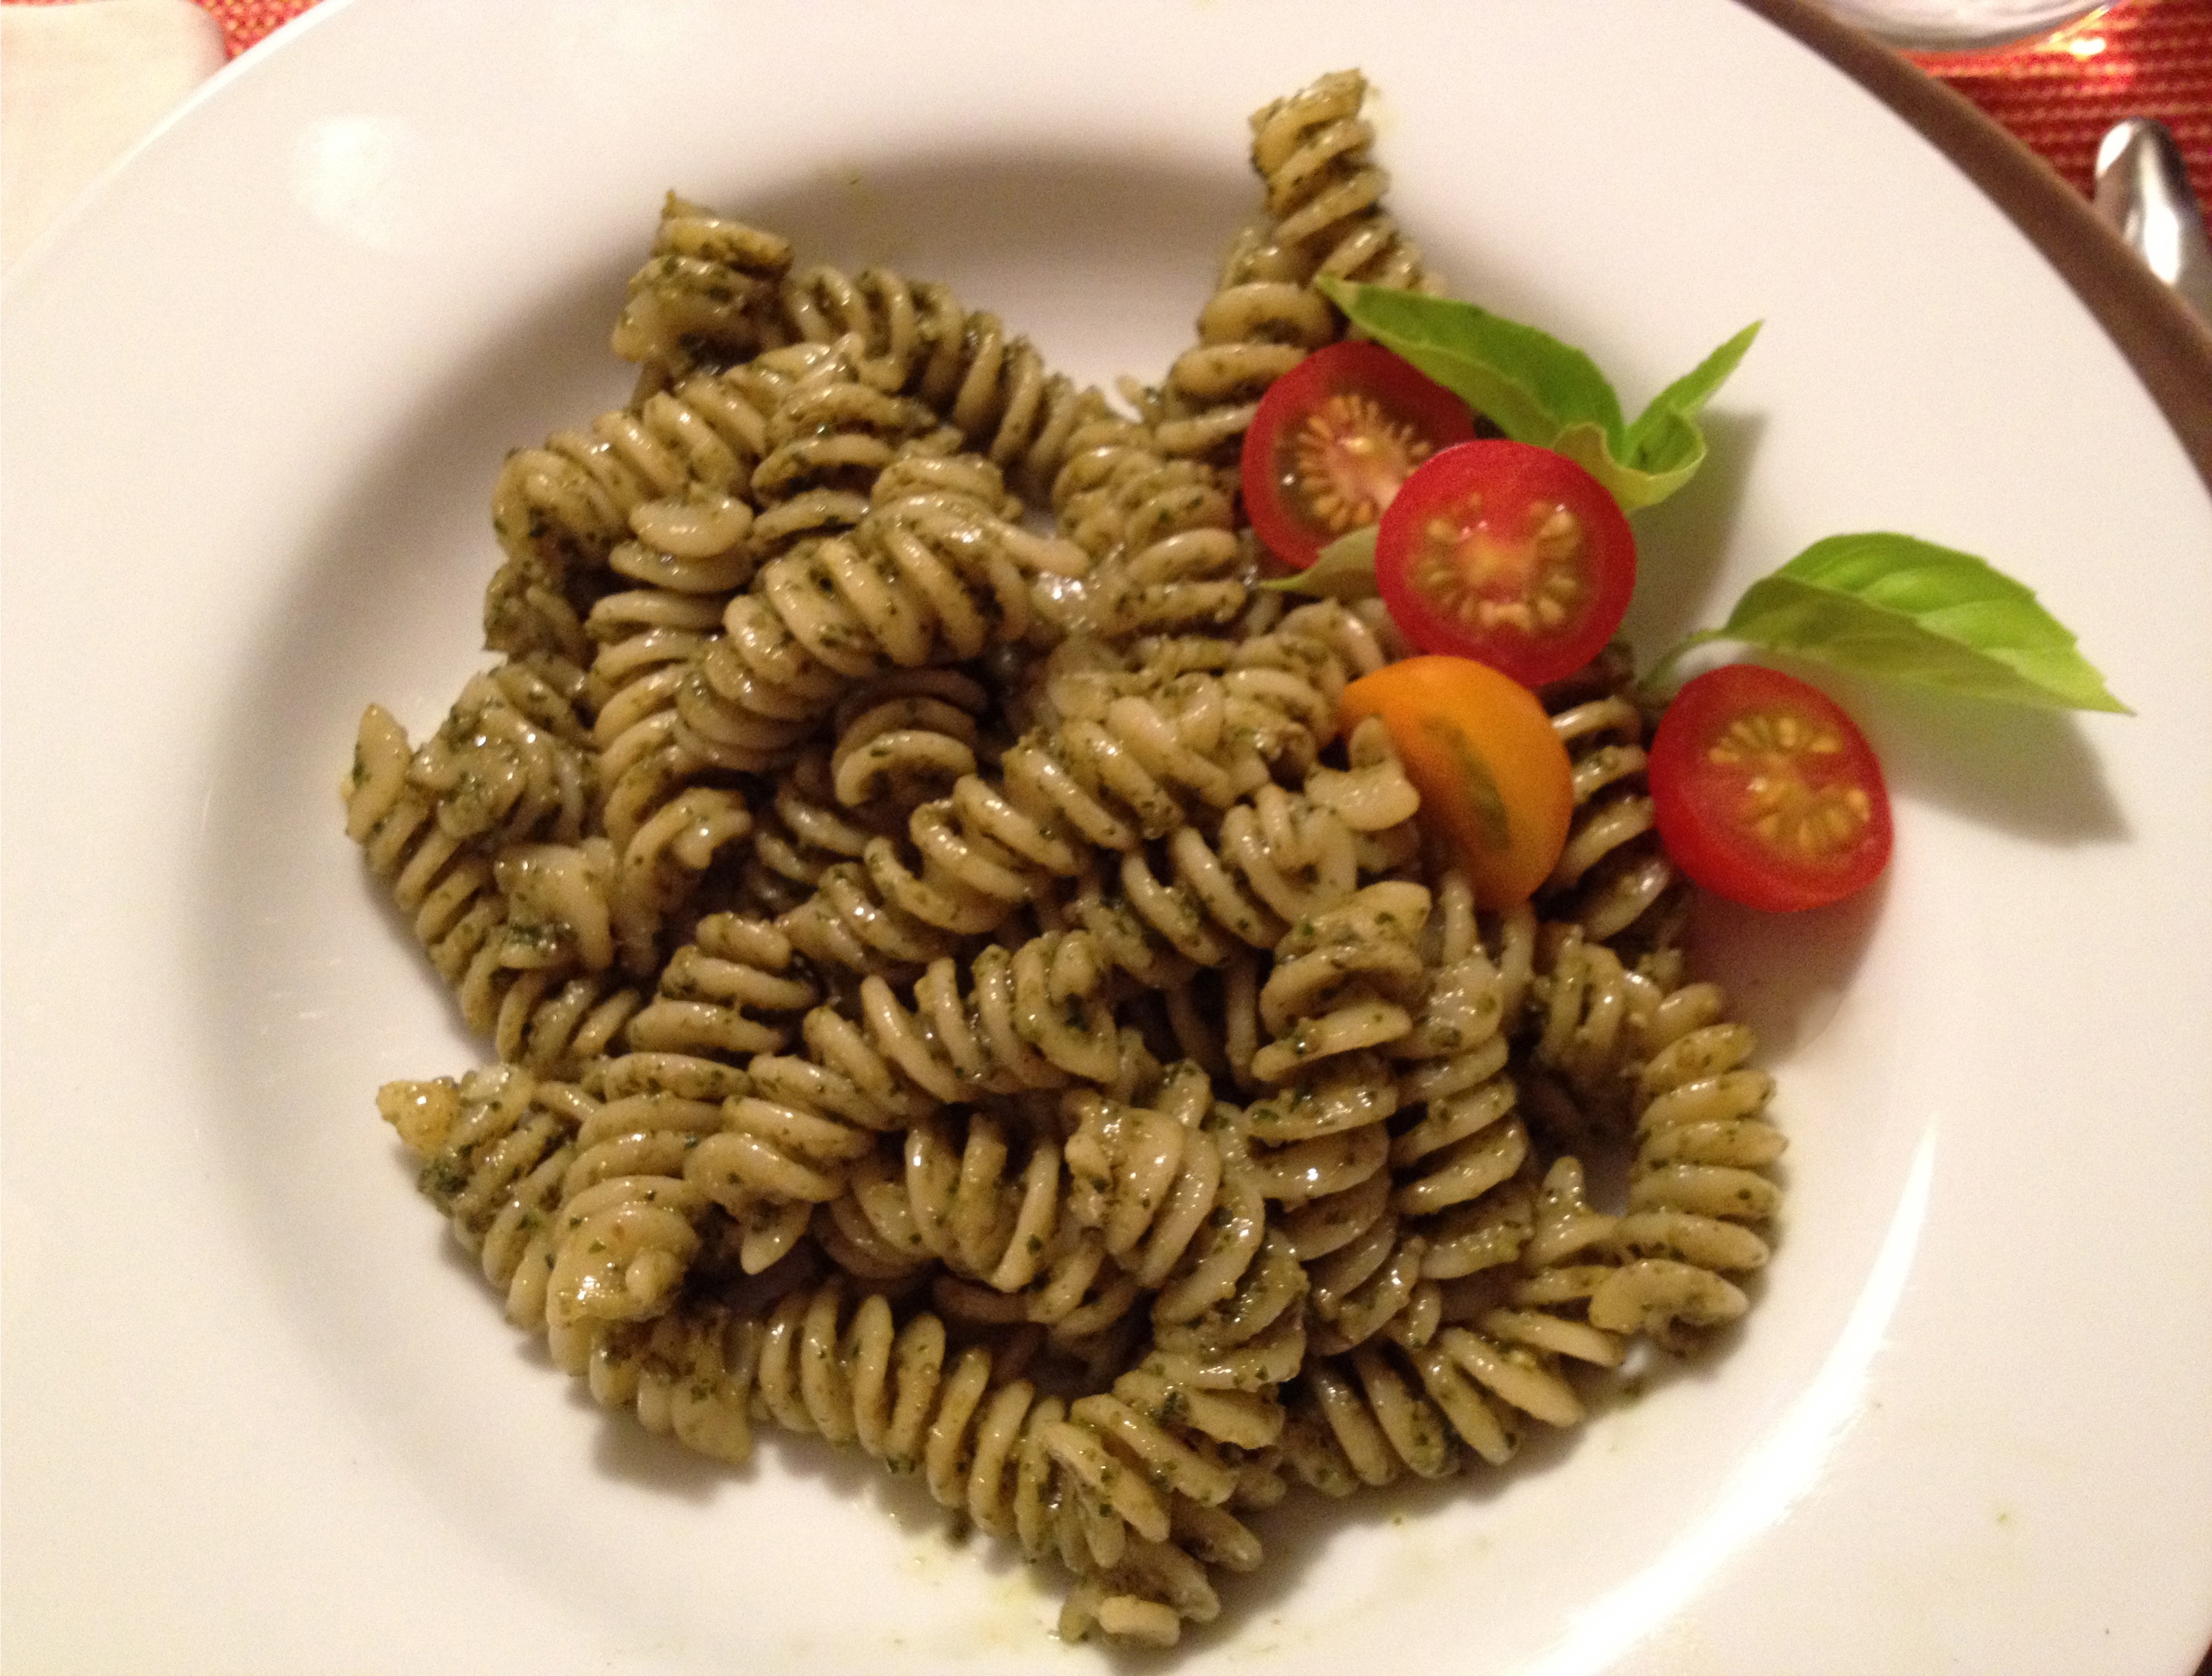 Pesto pasta and tomatoes in a white bowl.